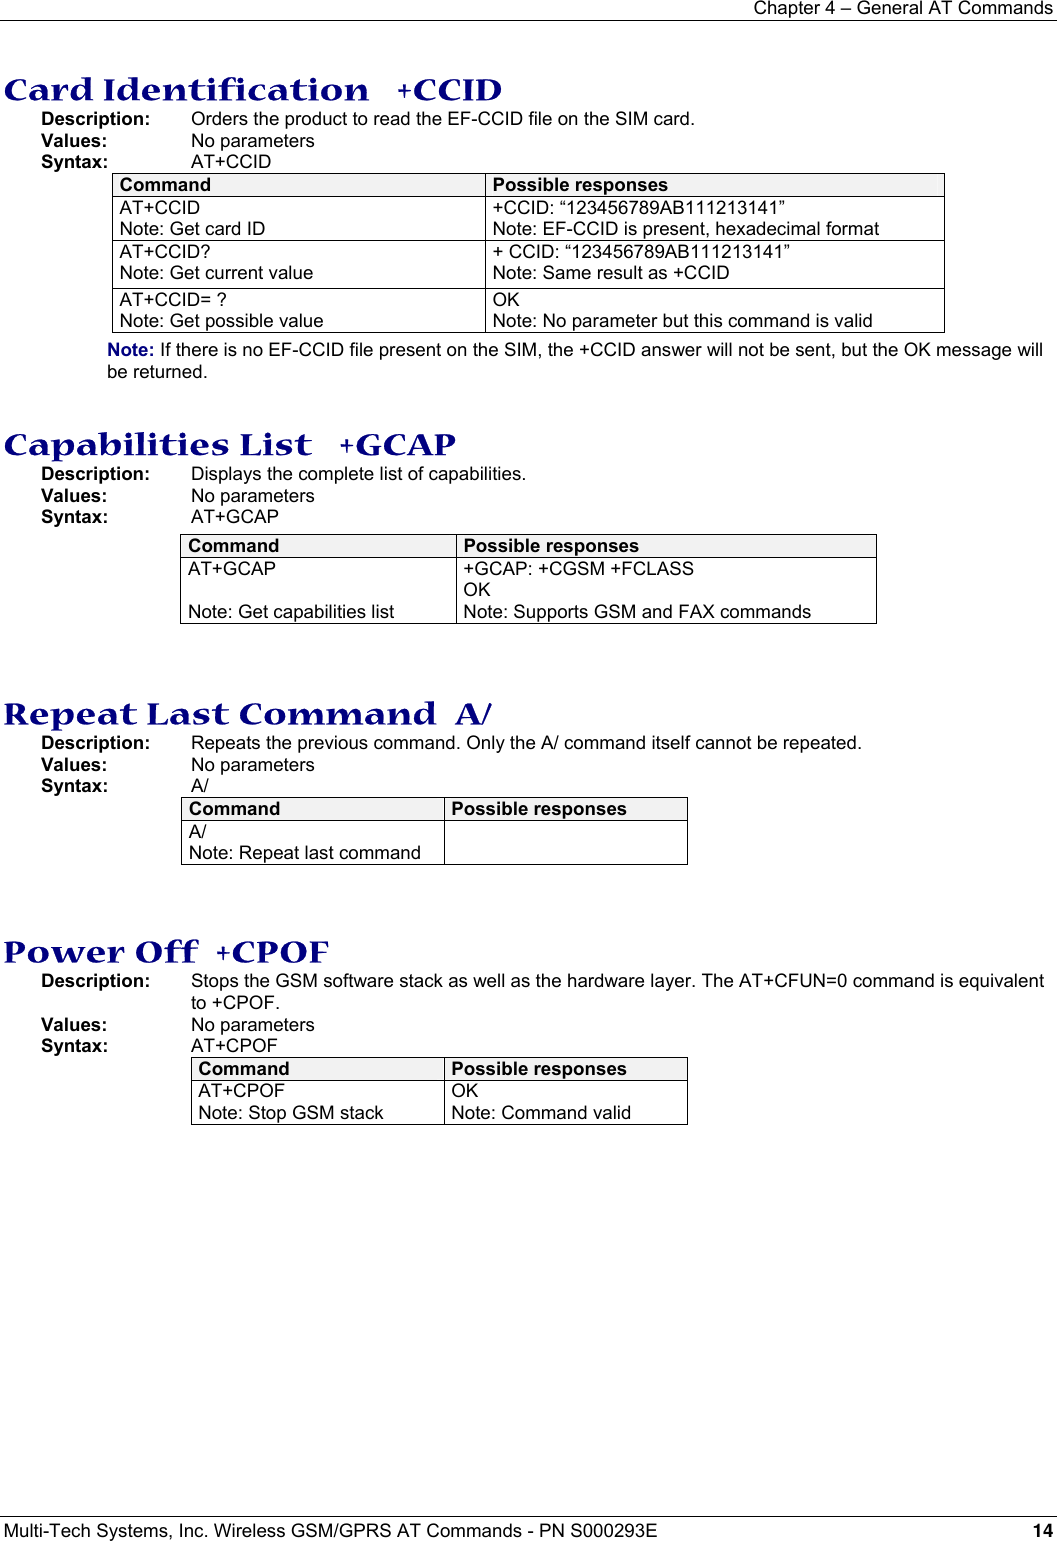 Chapter 4 – General AT Commands Multi-Tech Systems, Inc. Wireless GSM/GPRS AT Commands - PN S000293E 14  Card Identification   +CCID Description:   Orders the product to read the EF-CCID file on the SIM card. Values: No parameters Syntax: AT+CCID Command  Possible responses AT+CCID Note: Get card ID +CCID: “123456789AB111213141” Note: EF-CCID is present, hexadecimal format AT+CCID? Note: Get current value + CCID: “123456789AB111213141” Note: Same result as +CCID AT+CCID= ? Note: Get possible value OK Note: No parameter but this command is valid Note: If there is no EF-CCID file present on the SIM, the +CCID answer will not be sent, but the OK message will be returned.   Capabilities List   +GCAP Description:   Displays the complete list of capabilities. Values: No parameters Syntax: AT+GCAP Command  Possible responses AT+GCAP  Note: Get capabilities list +GCAP: +CGSM +FCLASS OK Note: Supports GSM and FAX commands   Repeat Last Command  A/ Description:  Repeats the previous command. Only the A/ command itself cannot be repeated. Values: No parameters Syntax: A/ Command  Possible responses A/ Note: Repeat last command        Power Off  +CPOF Description:  Stops the GSM software stack as well as the hardware layer. The AT+CFUN=0 command is equivalent to +CPOF. Values: No parameters Syntax: AT+CPOF Command  Possible responses AT+CPOF Note: Stop GSM stack OK Note: Command valid   